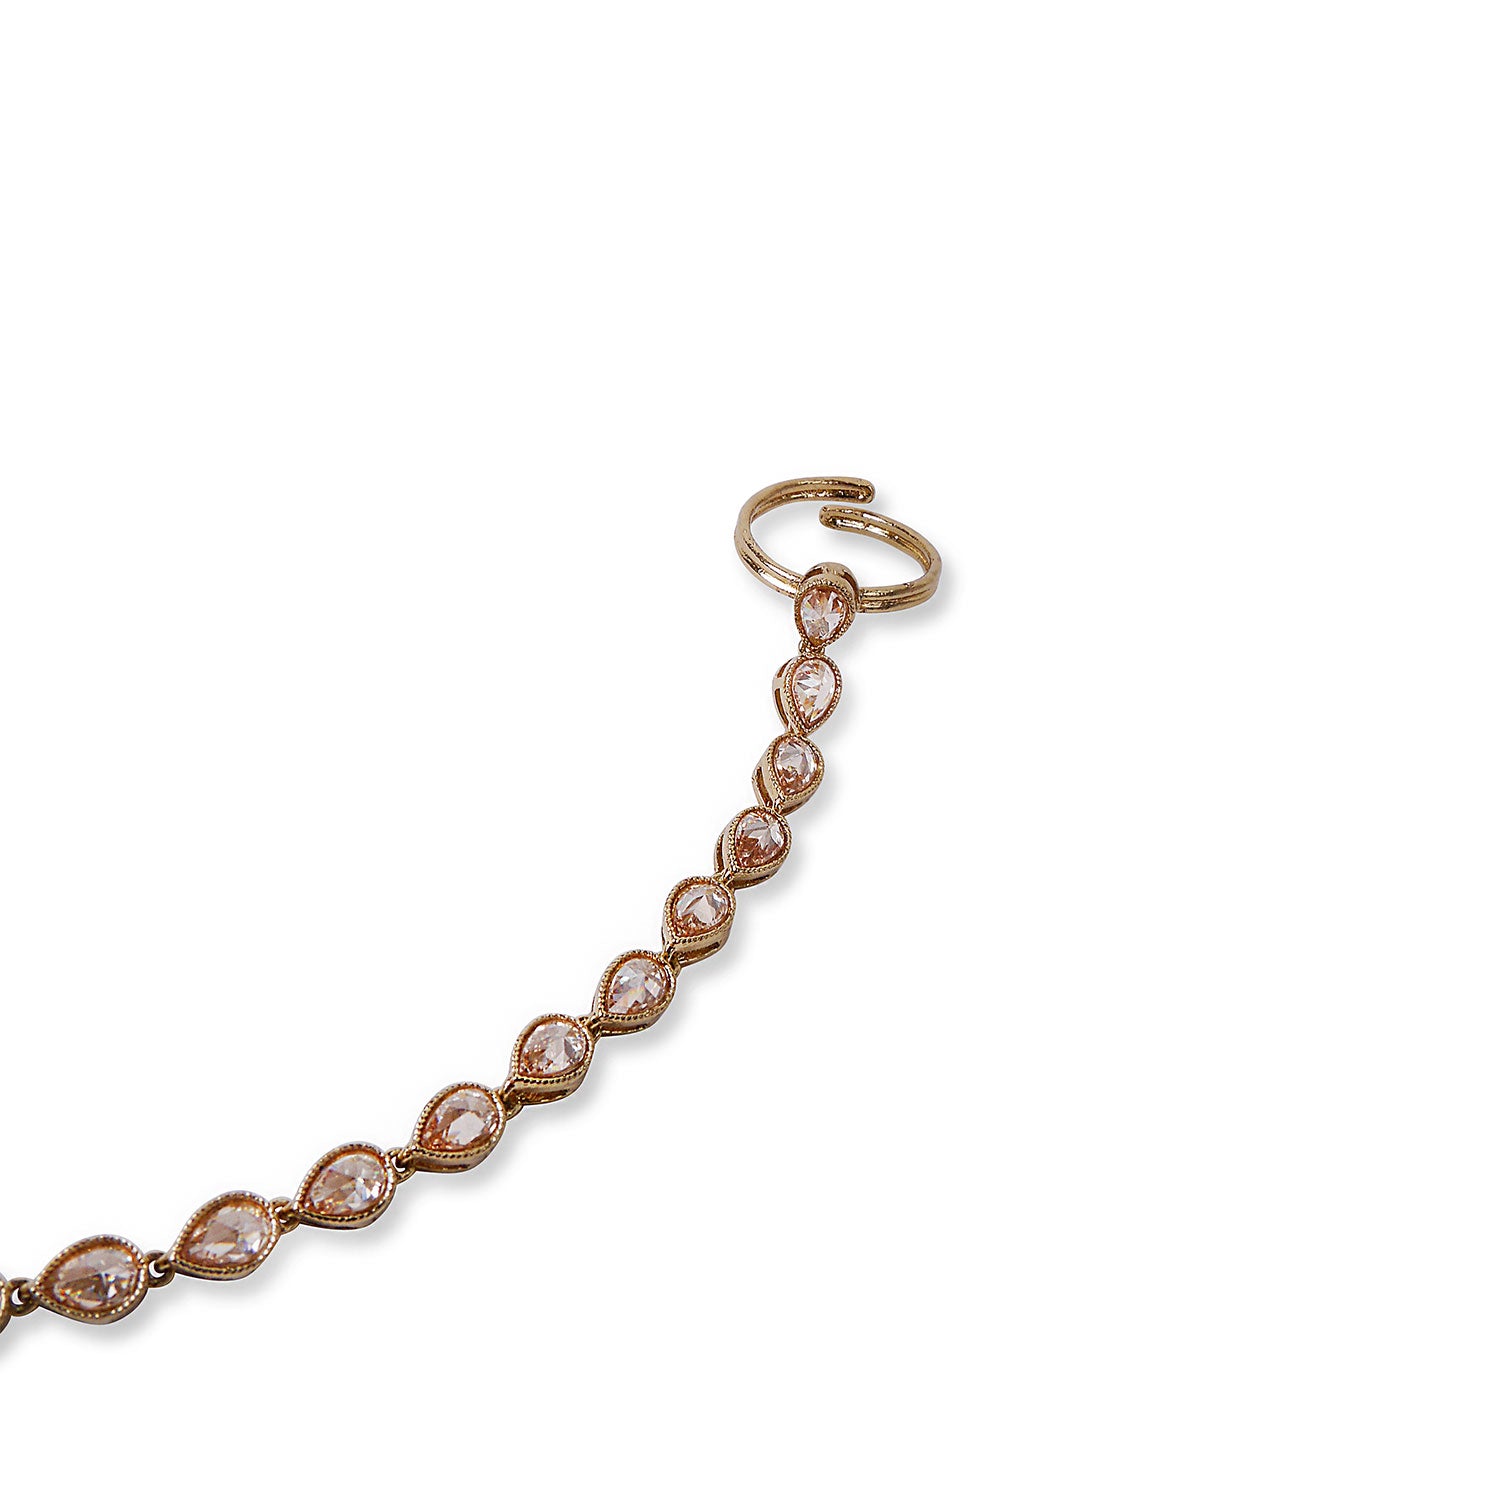 Pear Crystal Hand Chain in Antique Gold